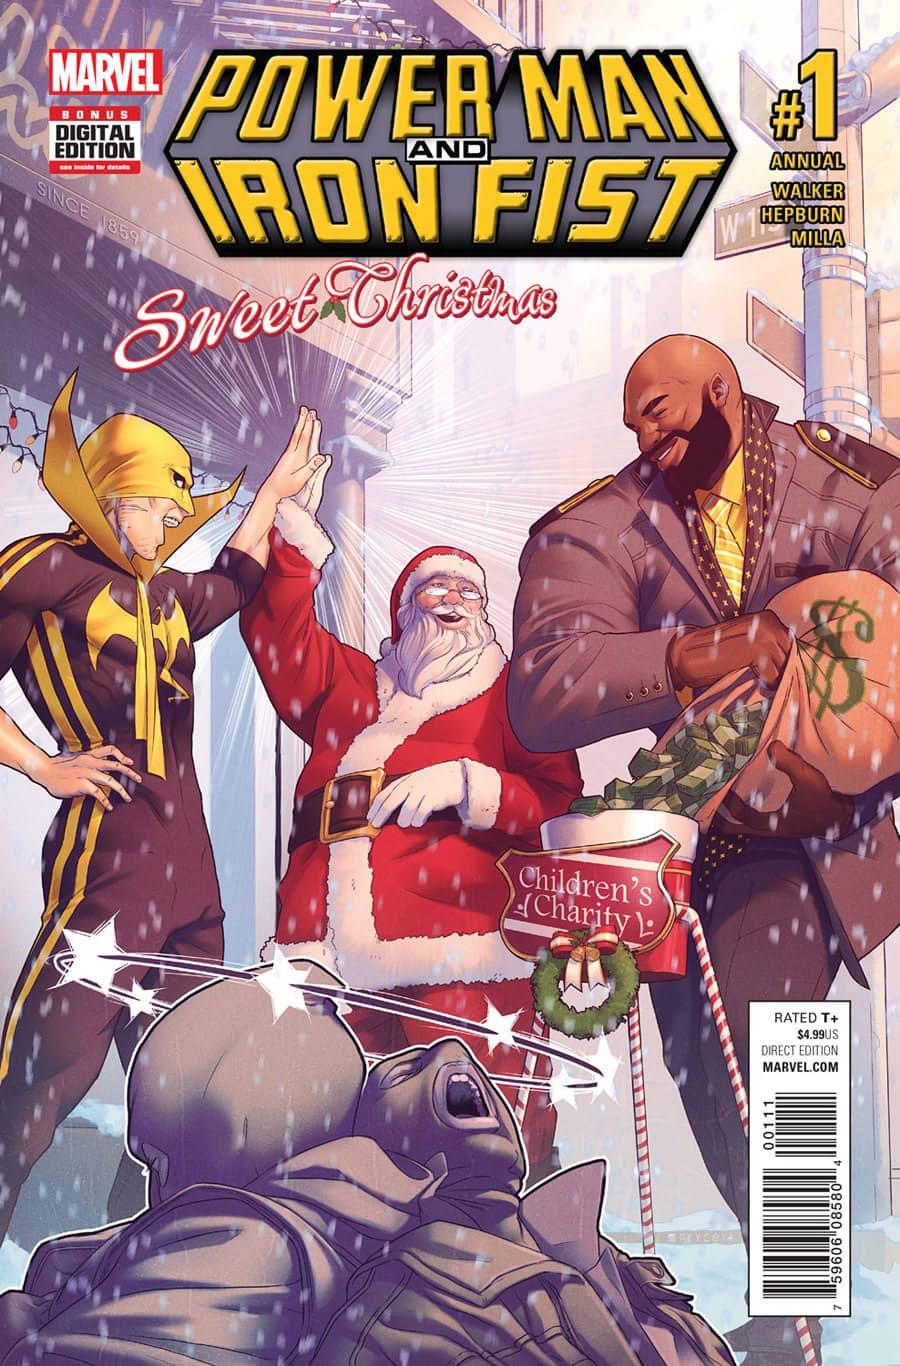 Power Man and Iron Fist: Sweet Christmas Vol. 1 #1